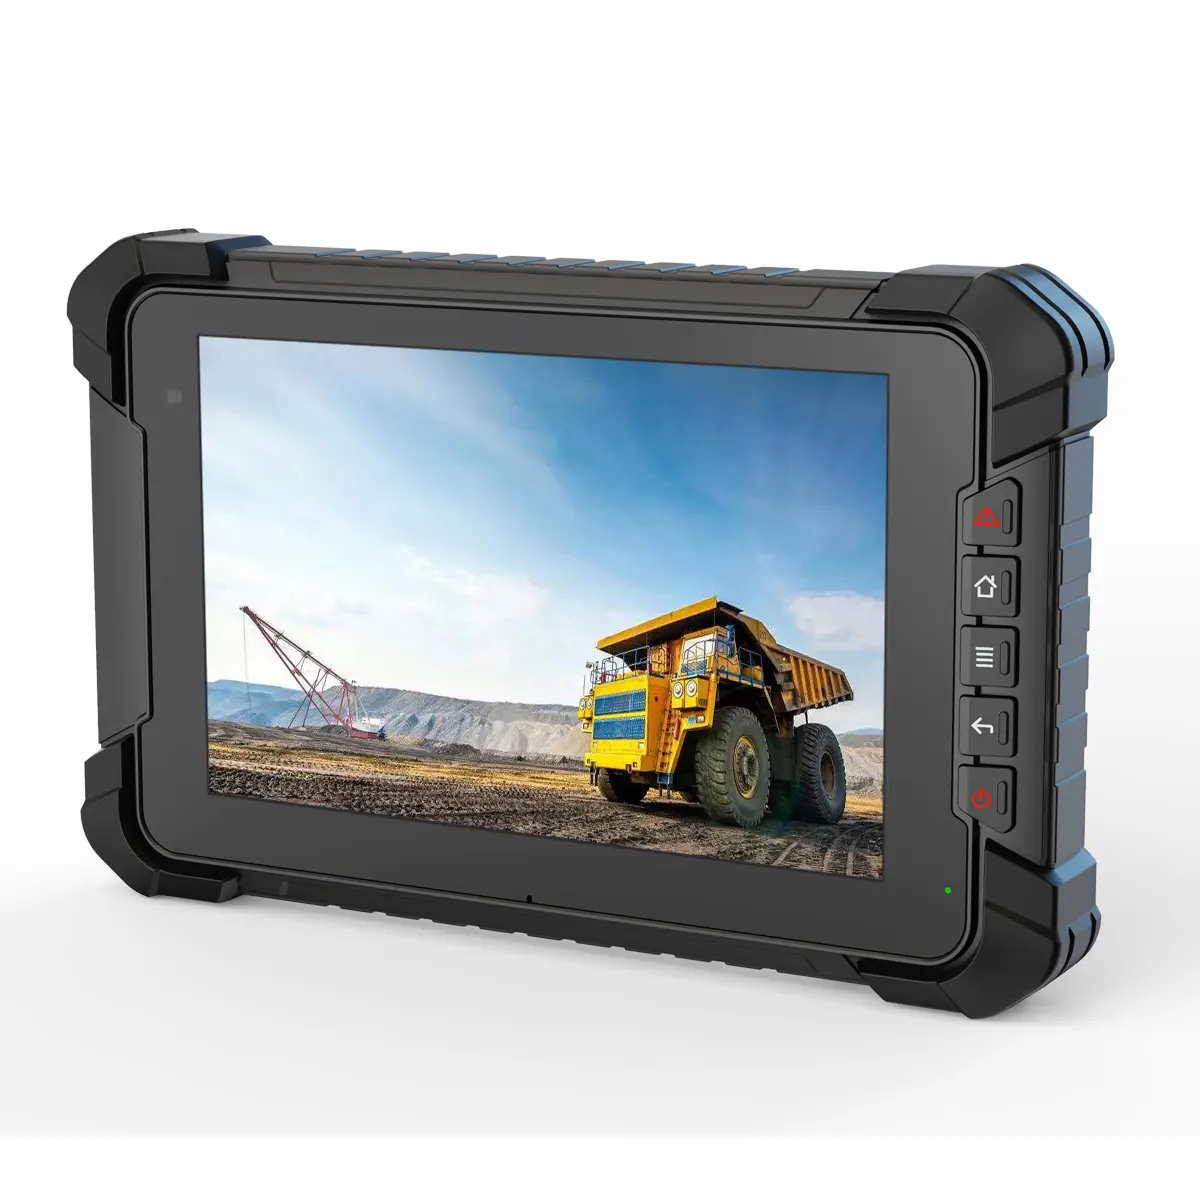 Android 9.0 7-inch High Brightness Rugged Mining   Industrial Control Terminal 4G LTE GPS Vehicle Tablet PC